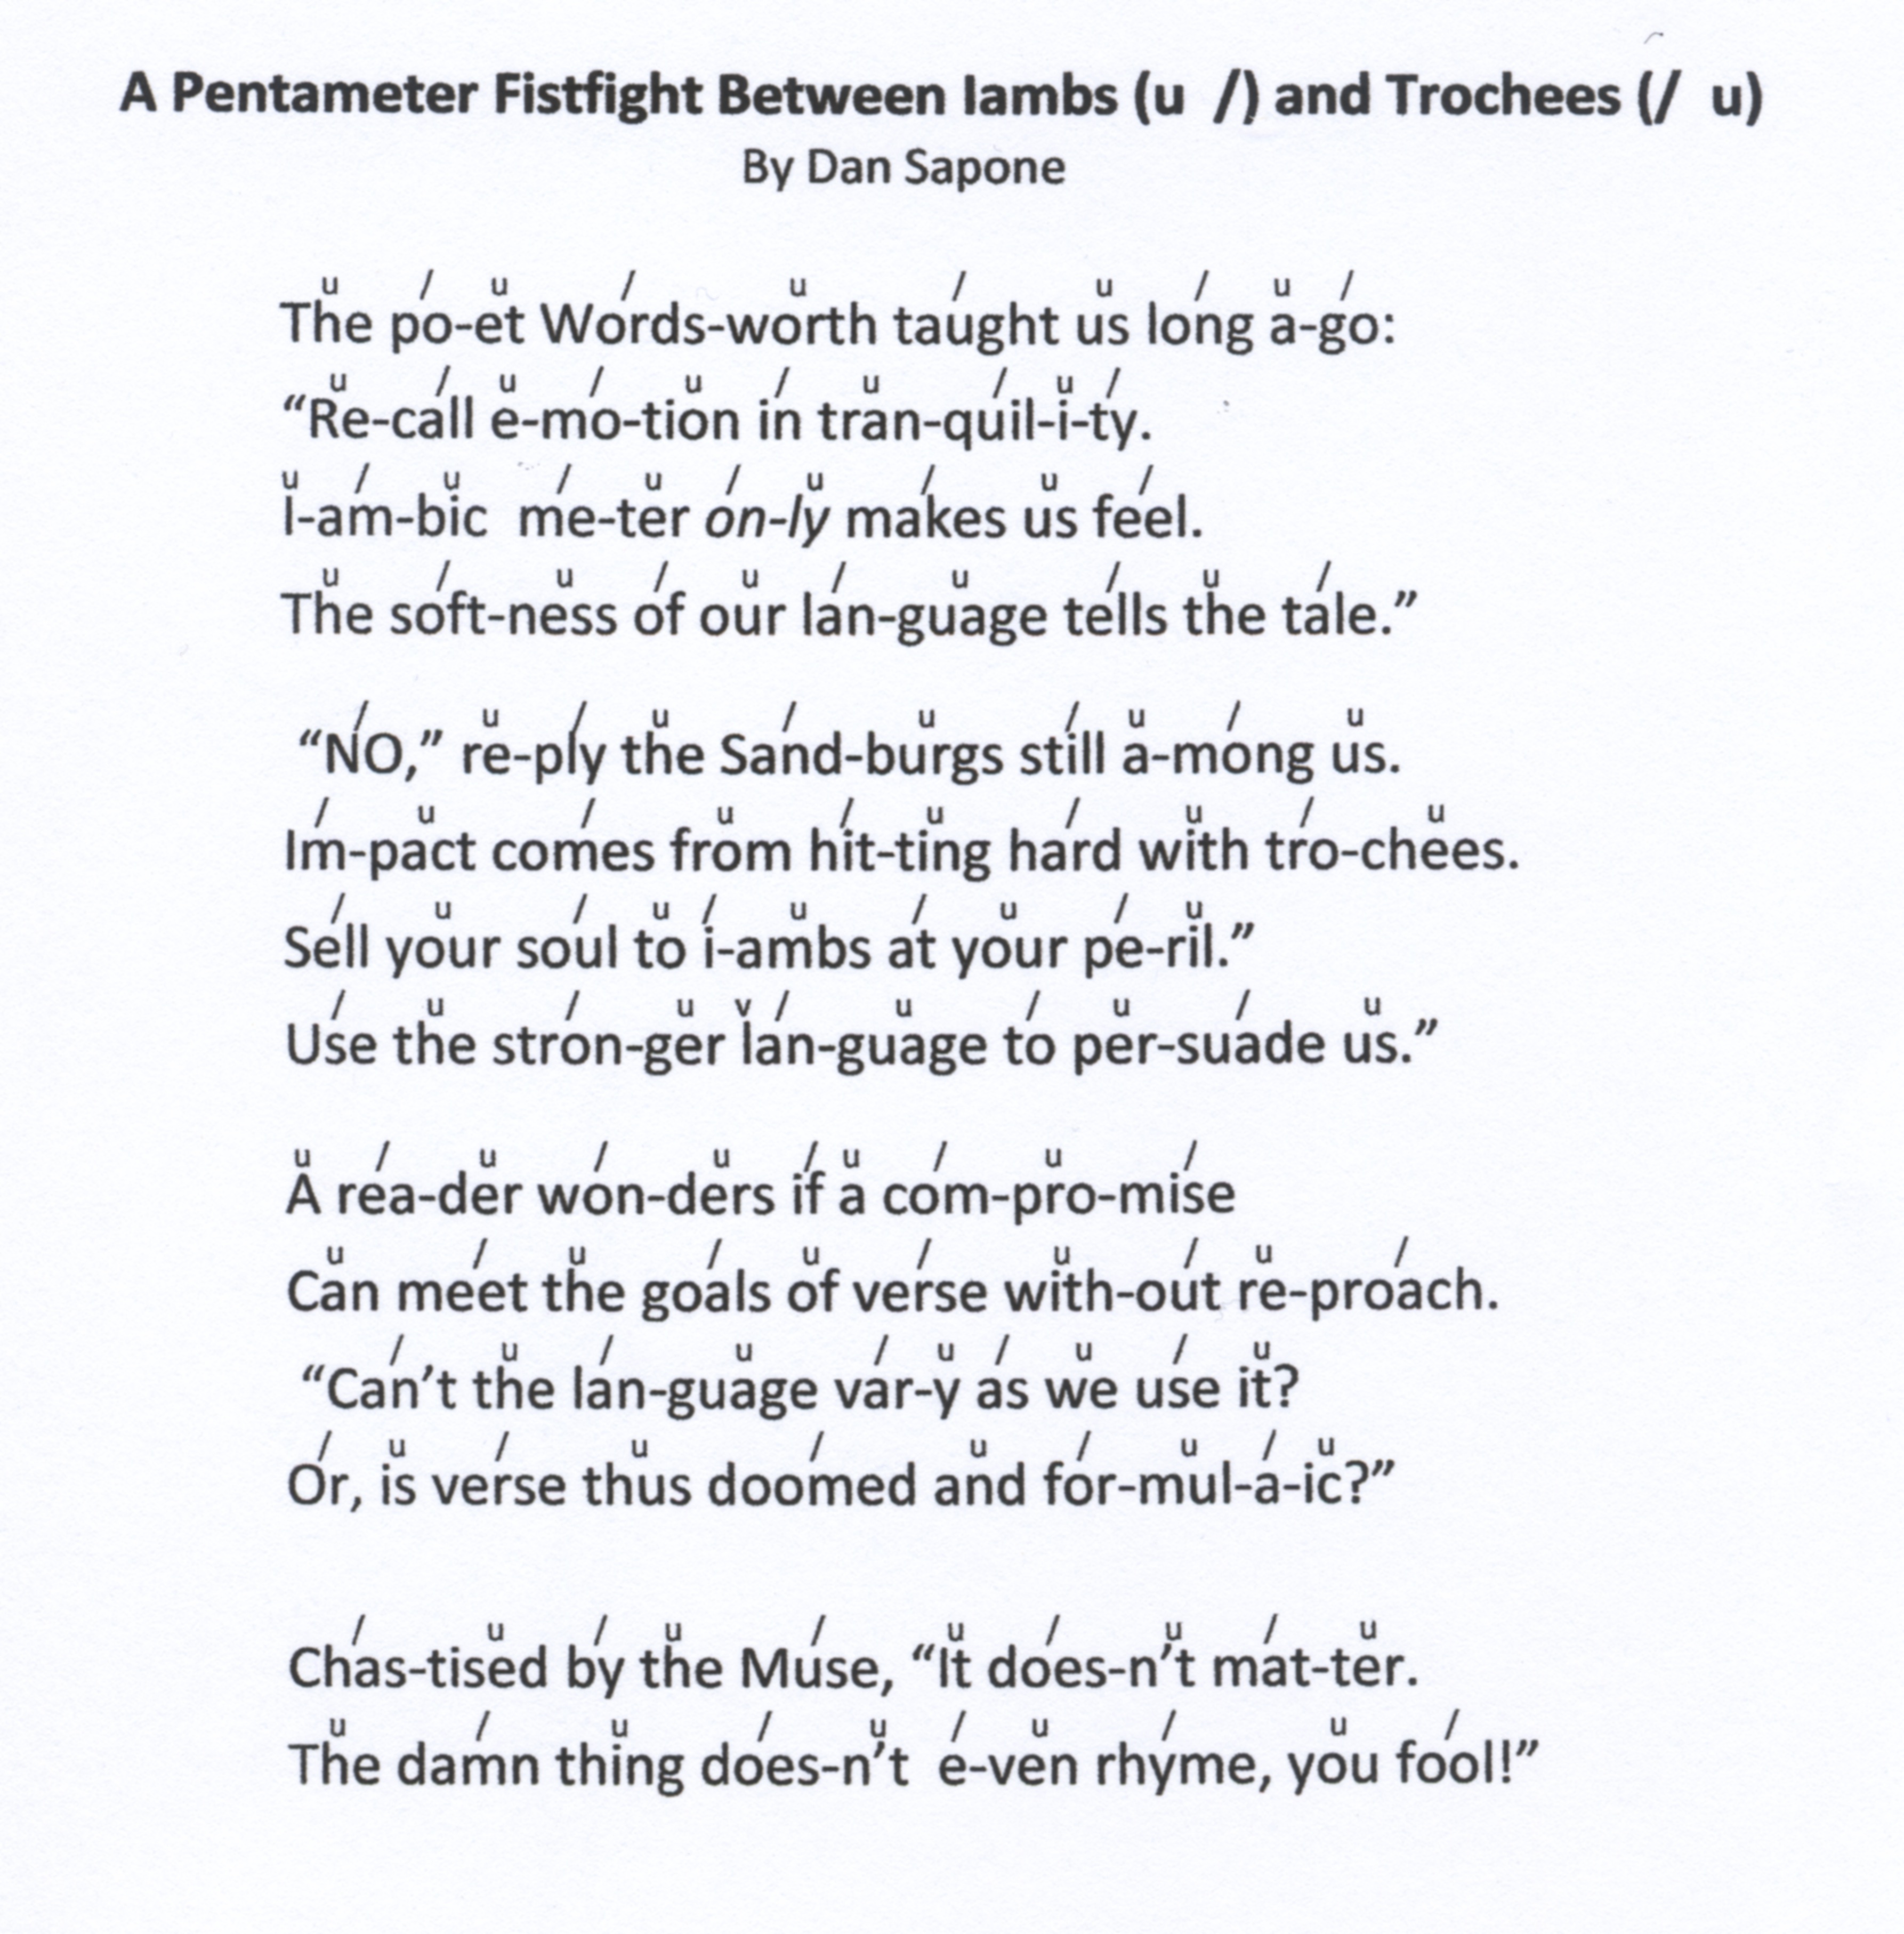 examples of iambic pentameter in sonnets shakespeare